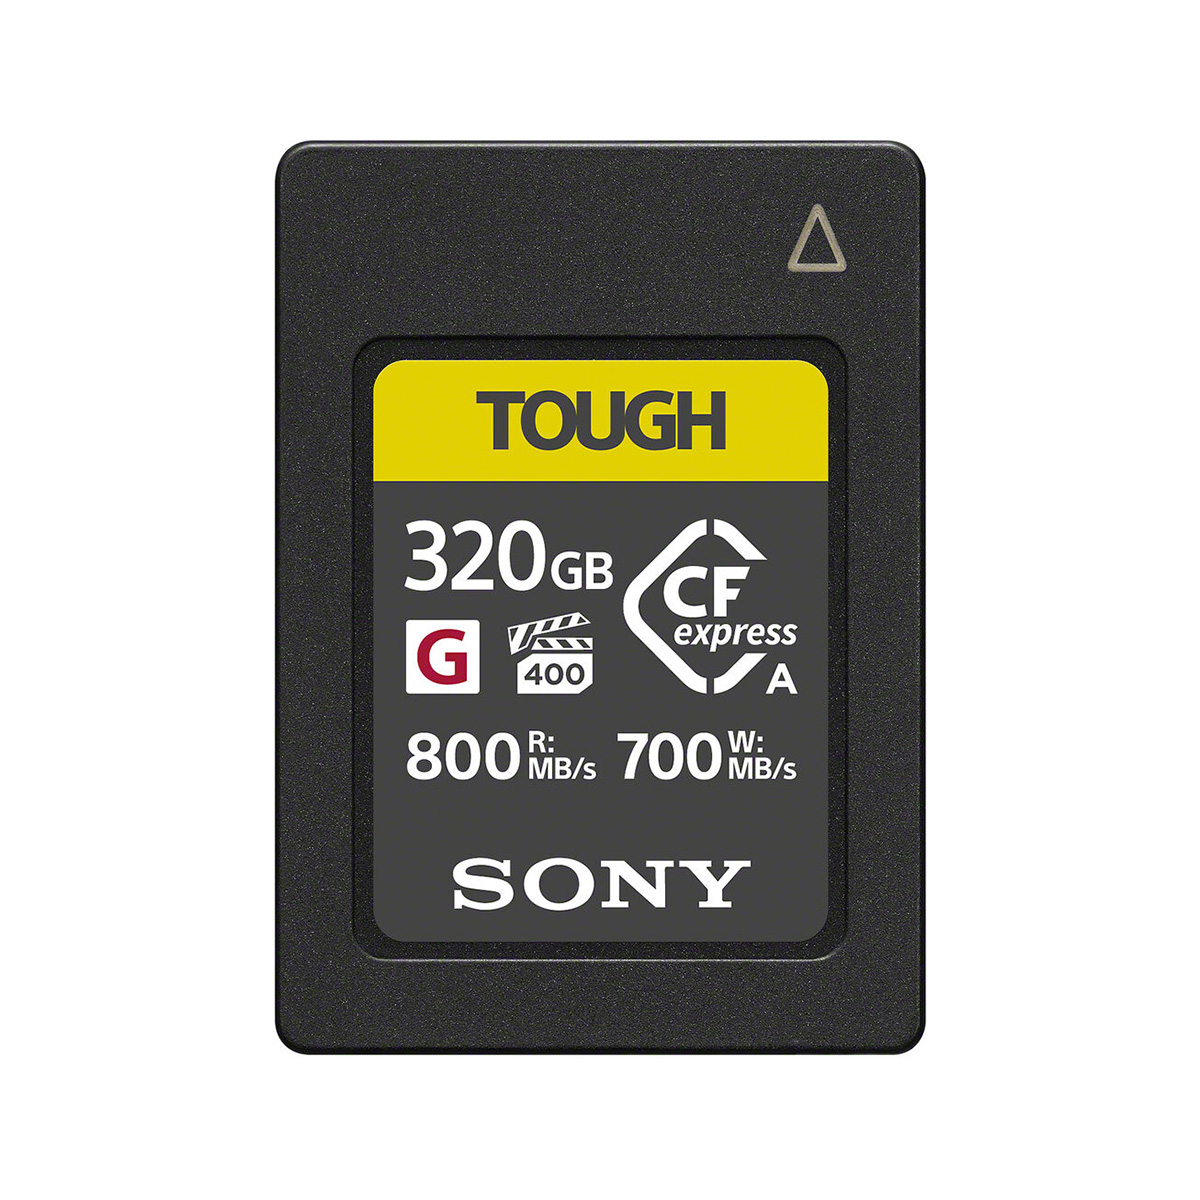 Sony 320GB CFexpress Type A TOUGH Memory Card - The Camera Exchange